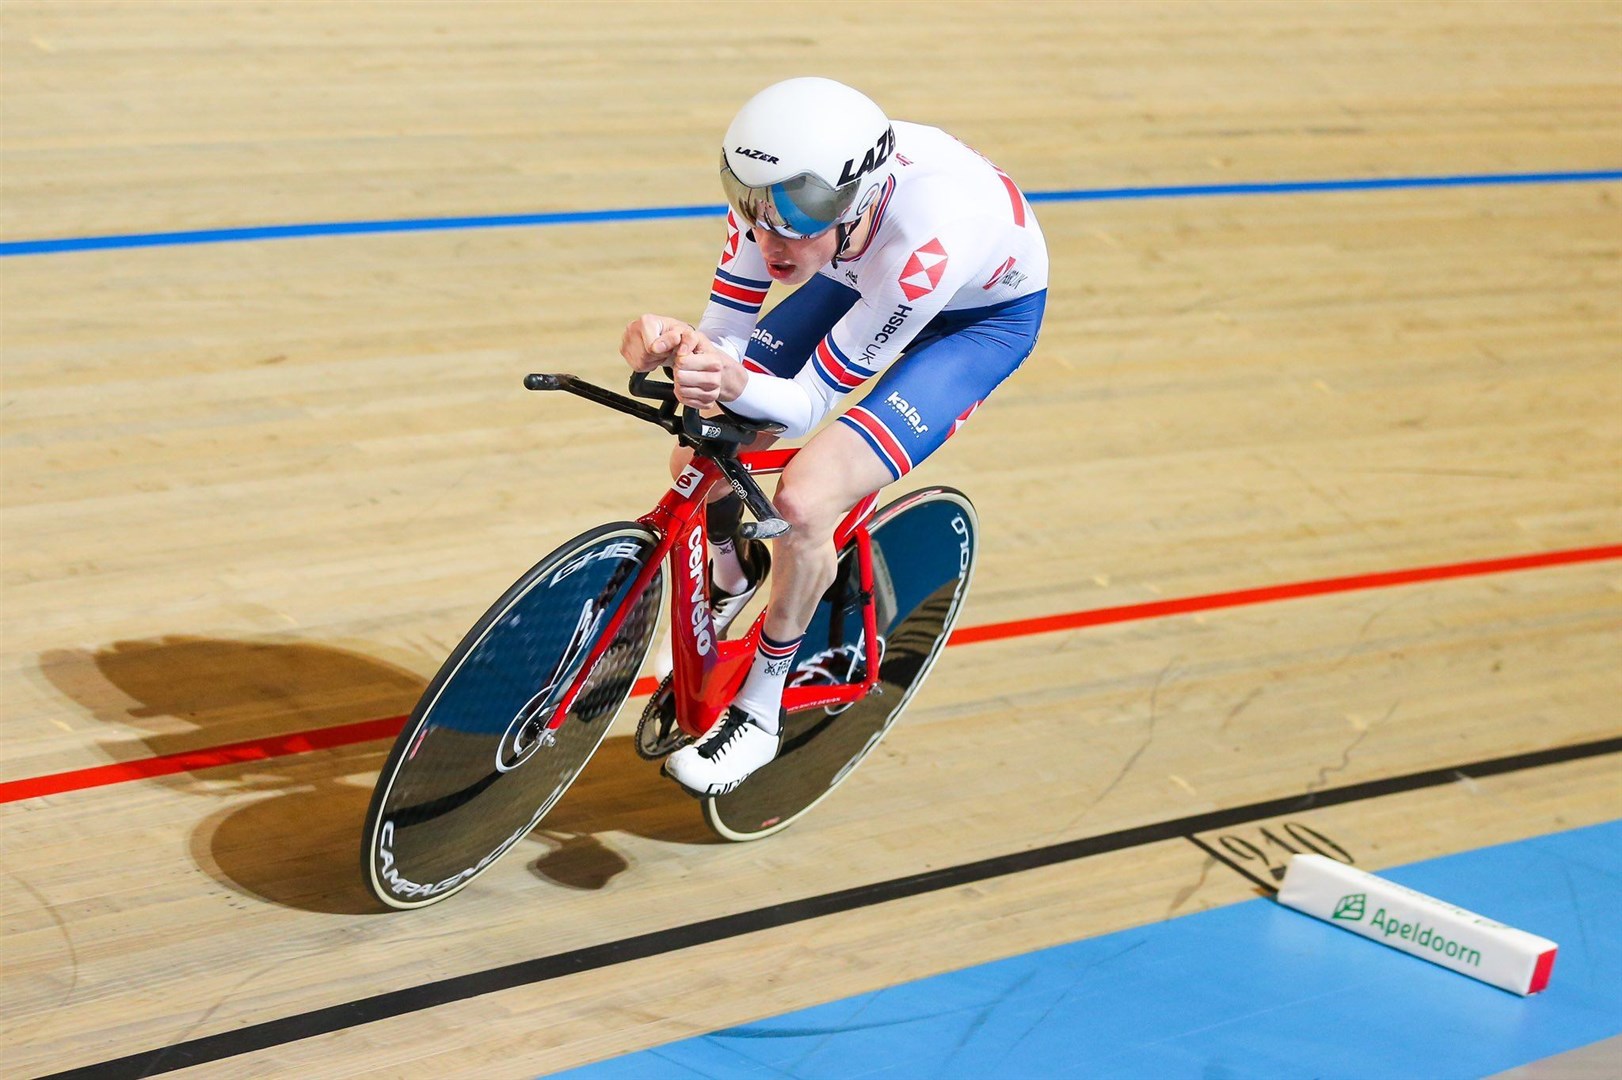 Fin Graham is aiming for a spot at the Tokyo Paralympics, which will take place next year.